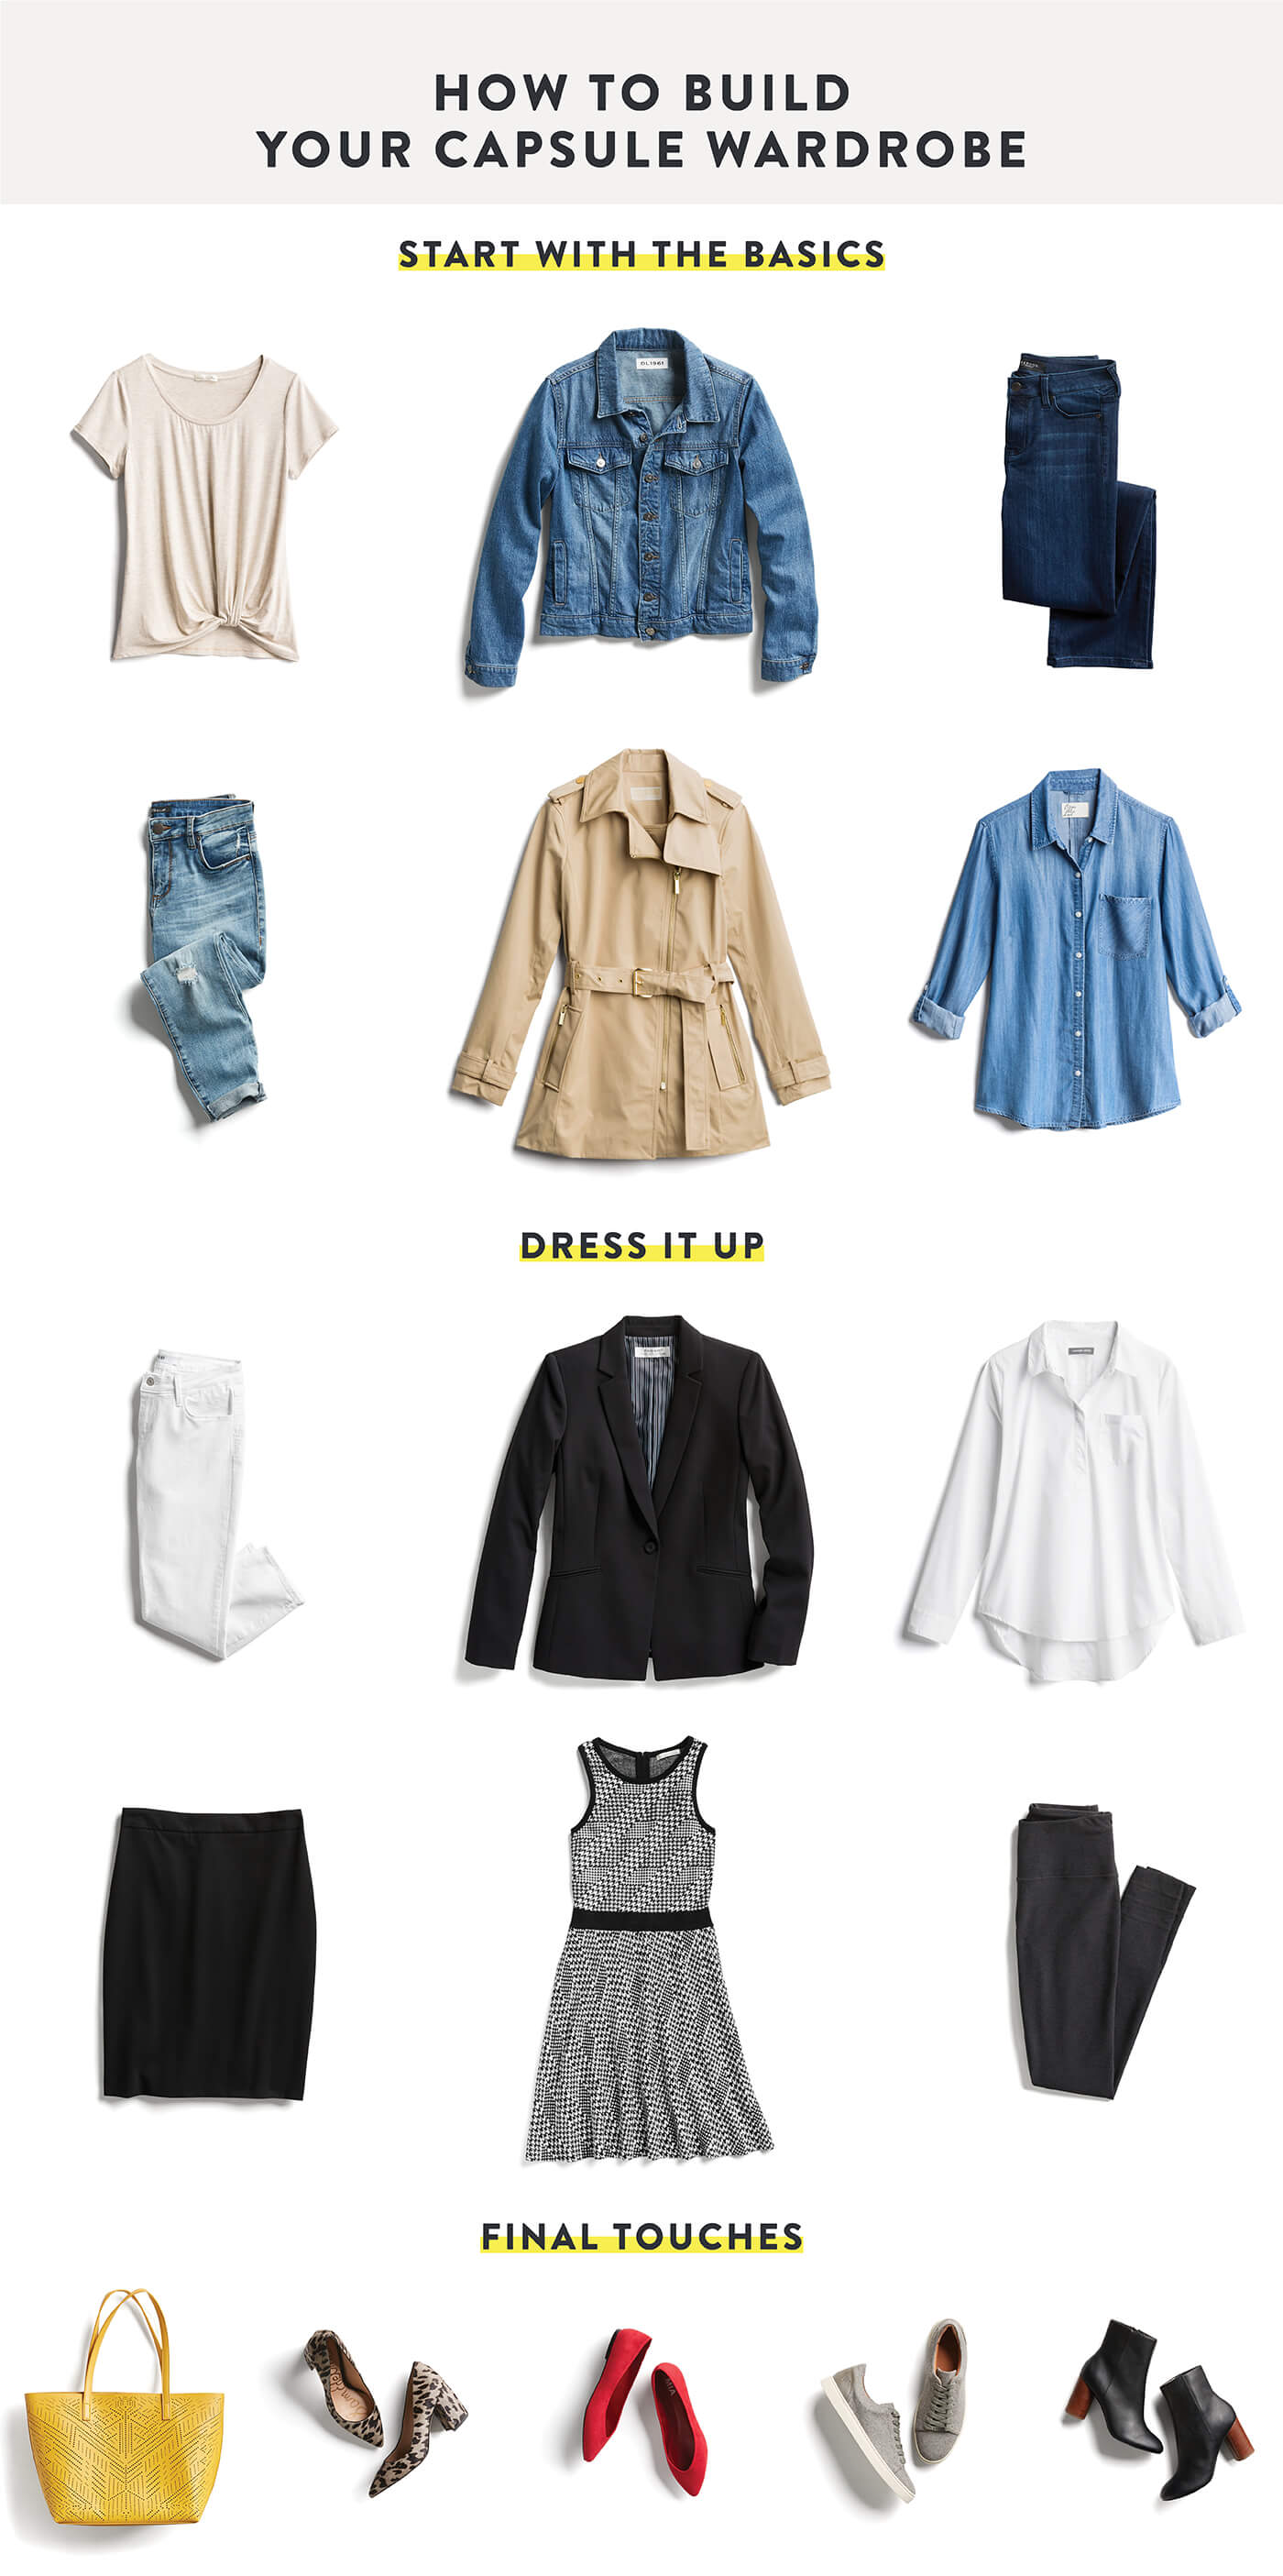 Top 10 Clothing Essentials to Add to Your Winter Capsule Wardrobe